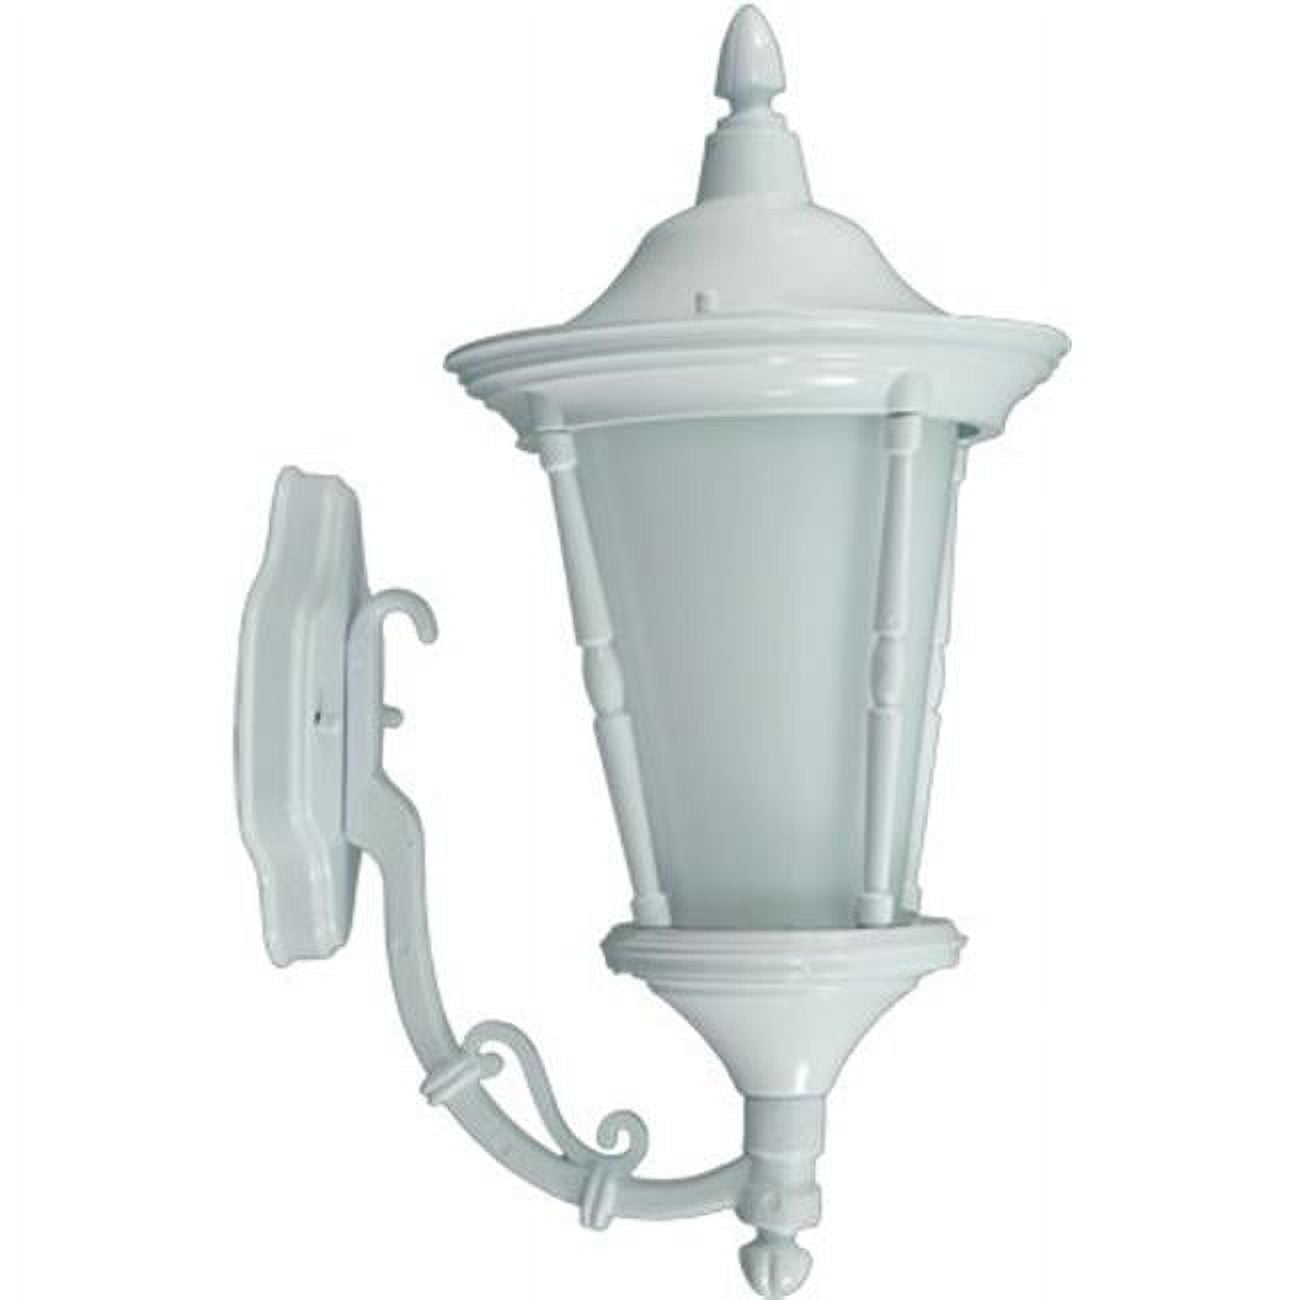 Picture of Dabmar Lighting GM115-W Powder Coated Cast Aluminum Wall Light Fixture, White - 18.94 x 9.25 x 13.19 in.